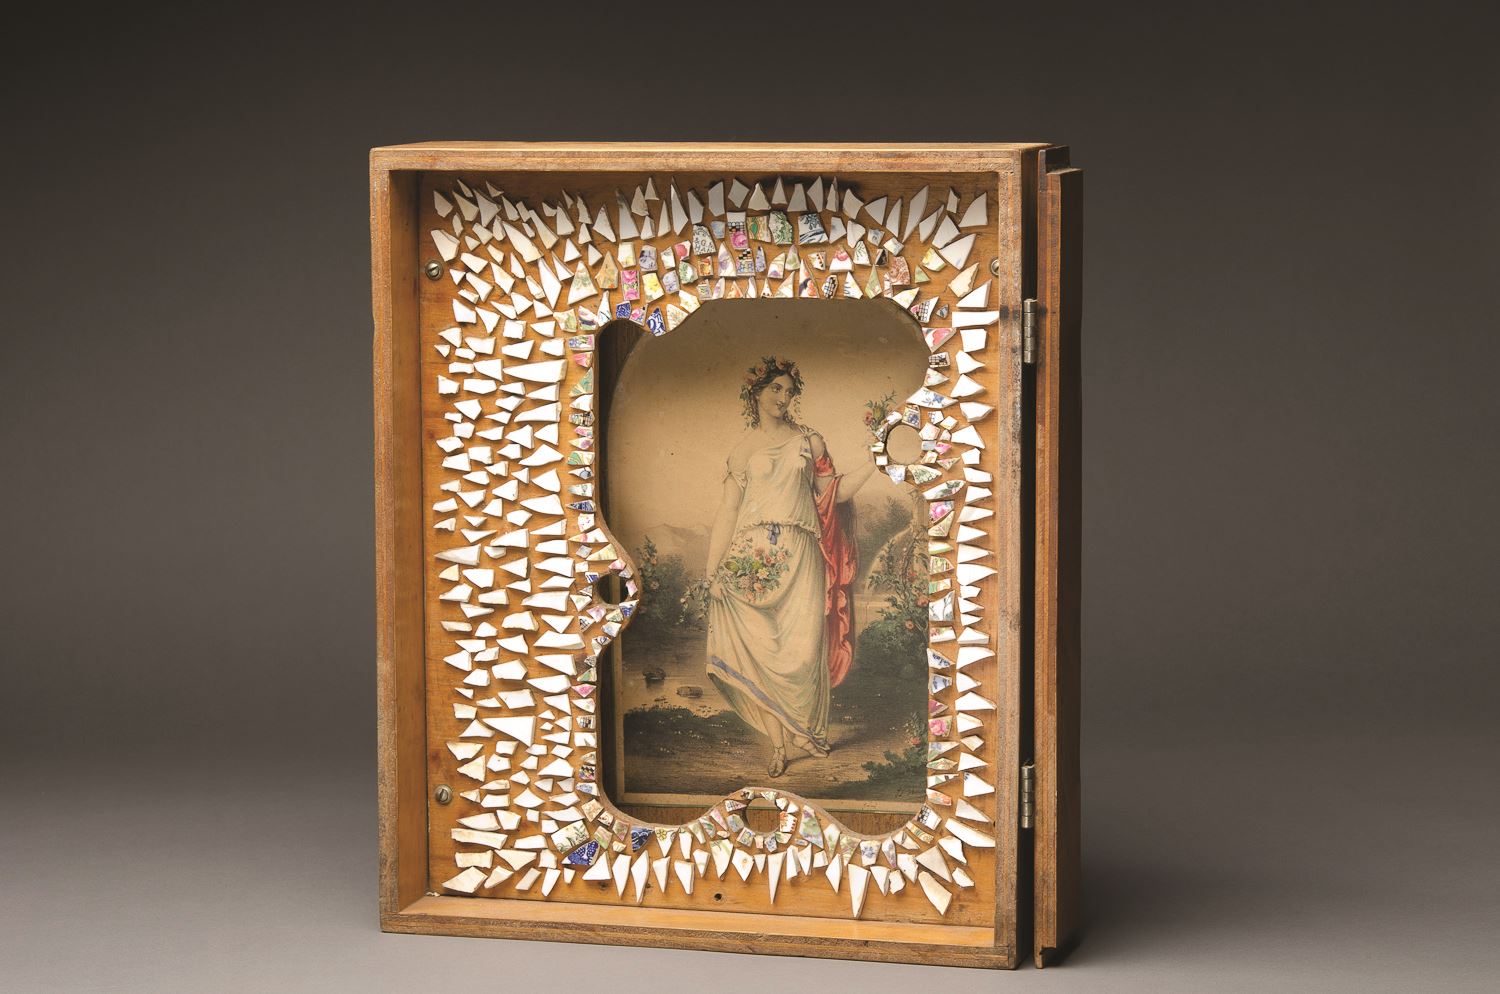 Rosalie Gascoigne Flora Galop 1976 found wooden cabinet, wood frame, shards of china and hand coloured engraving, glue and screws Purchased by Newcastle Art Gallery Foundation 2013 Newcastle Art Gallery collection